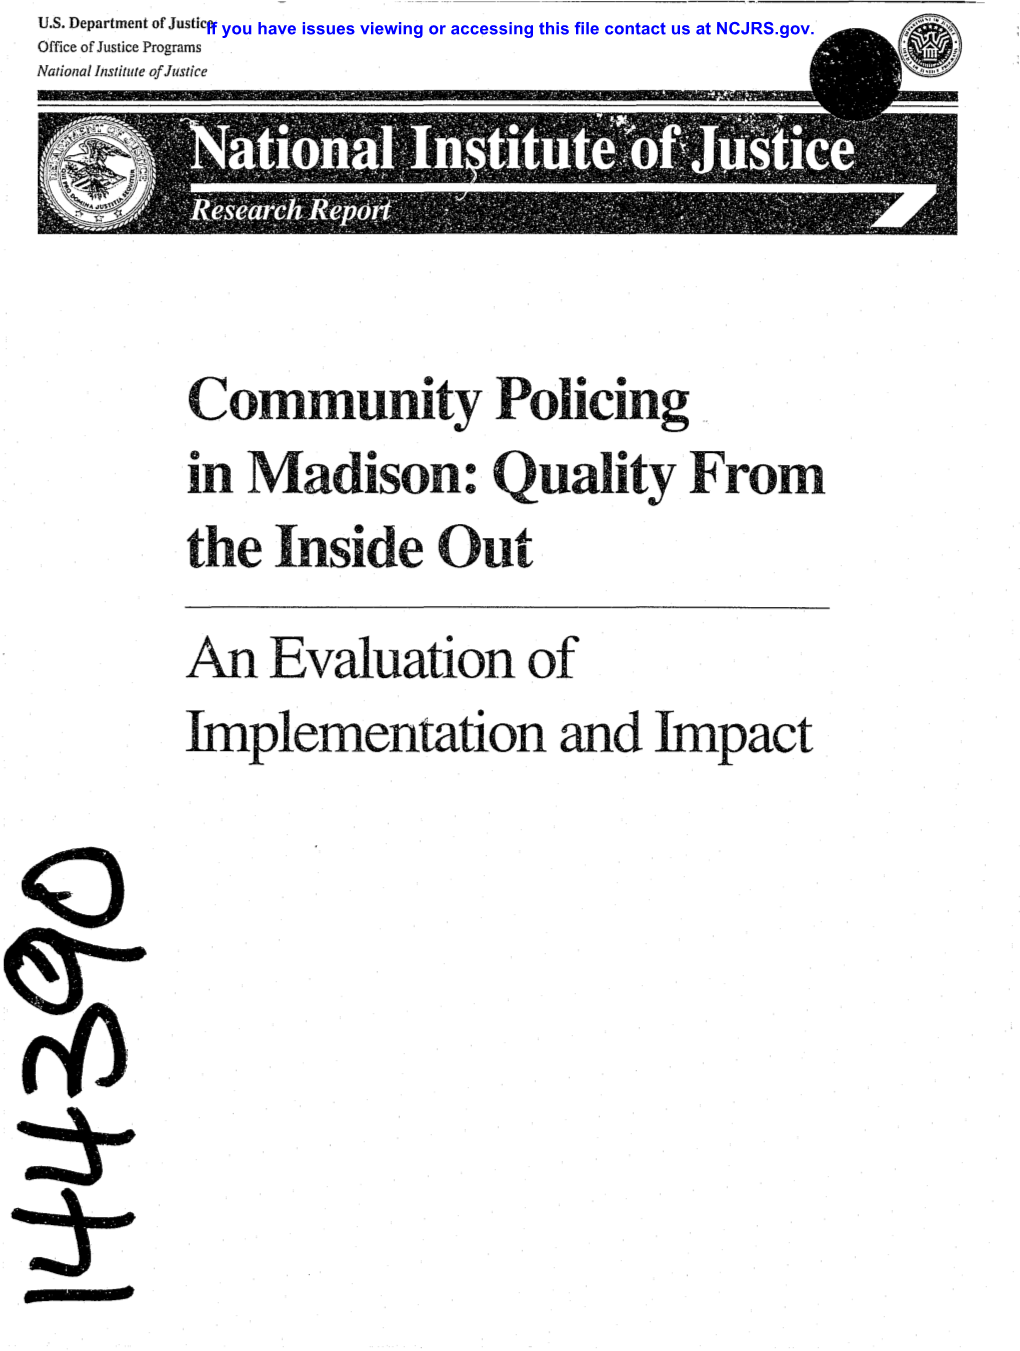 Community Policing. in Madison: Quality from the Inside Ollt an Evaluation of Implementation and Impact About the National Institute of Justice